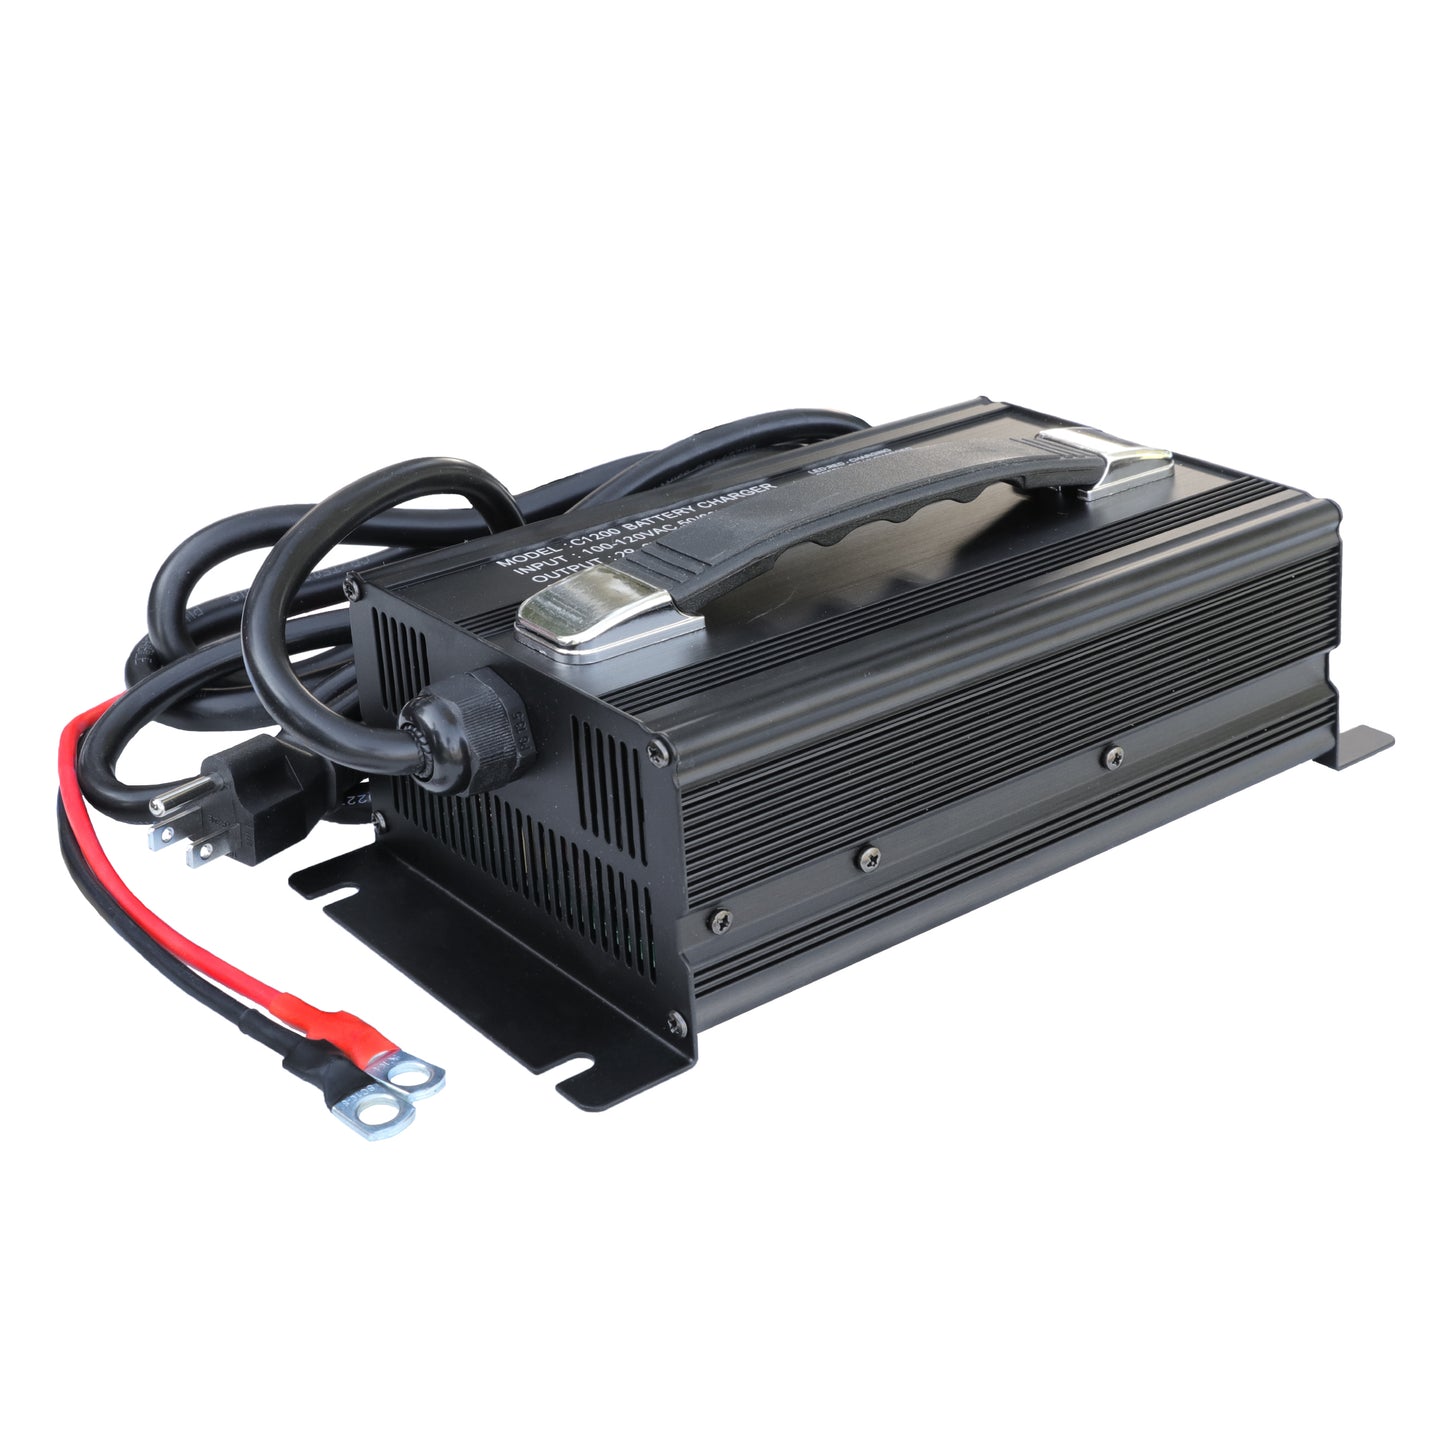 MillerTech 12V 40A Lithium Iron Phosphate Battery Charger (1240C)